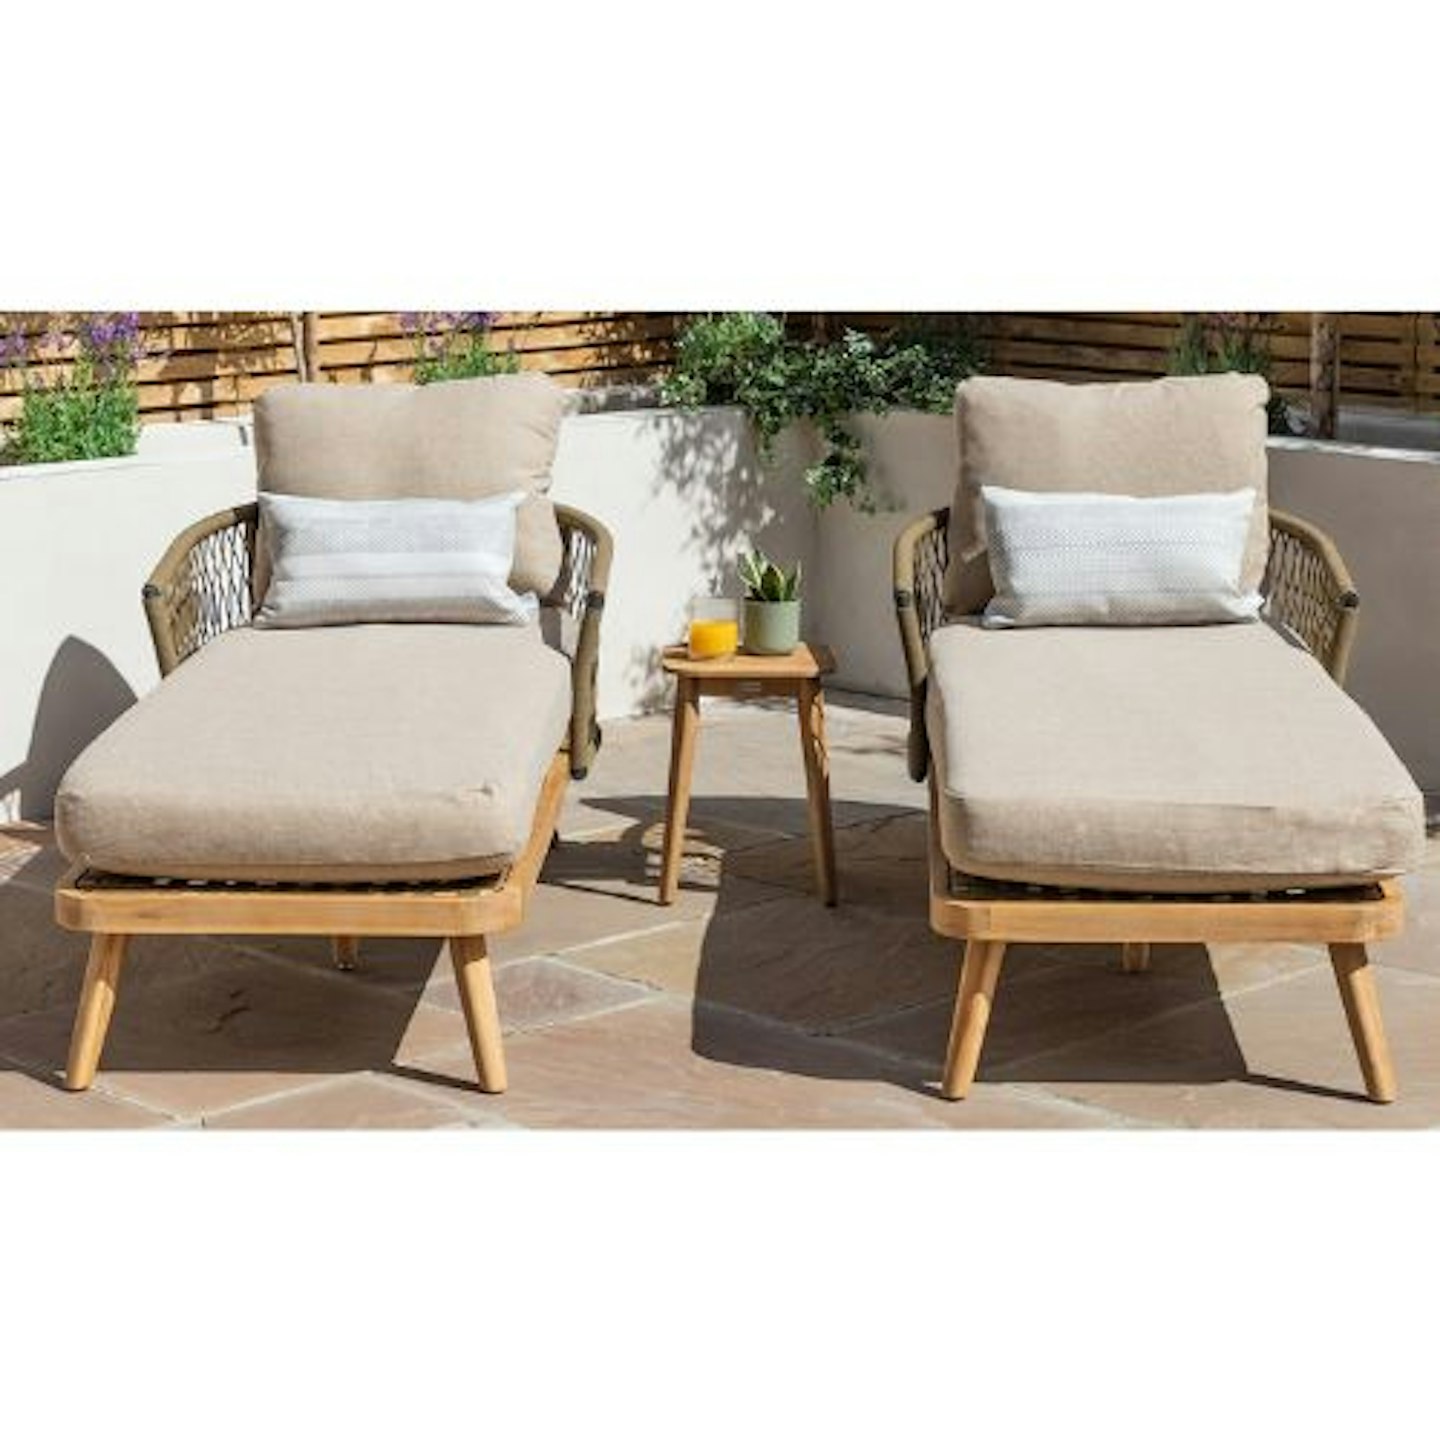 Bali Rope Weave Double Sunlounger Set with Interchangeable Cushion Covers